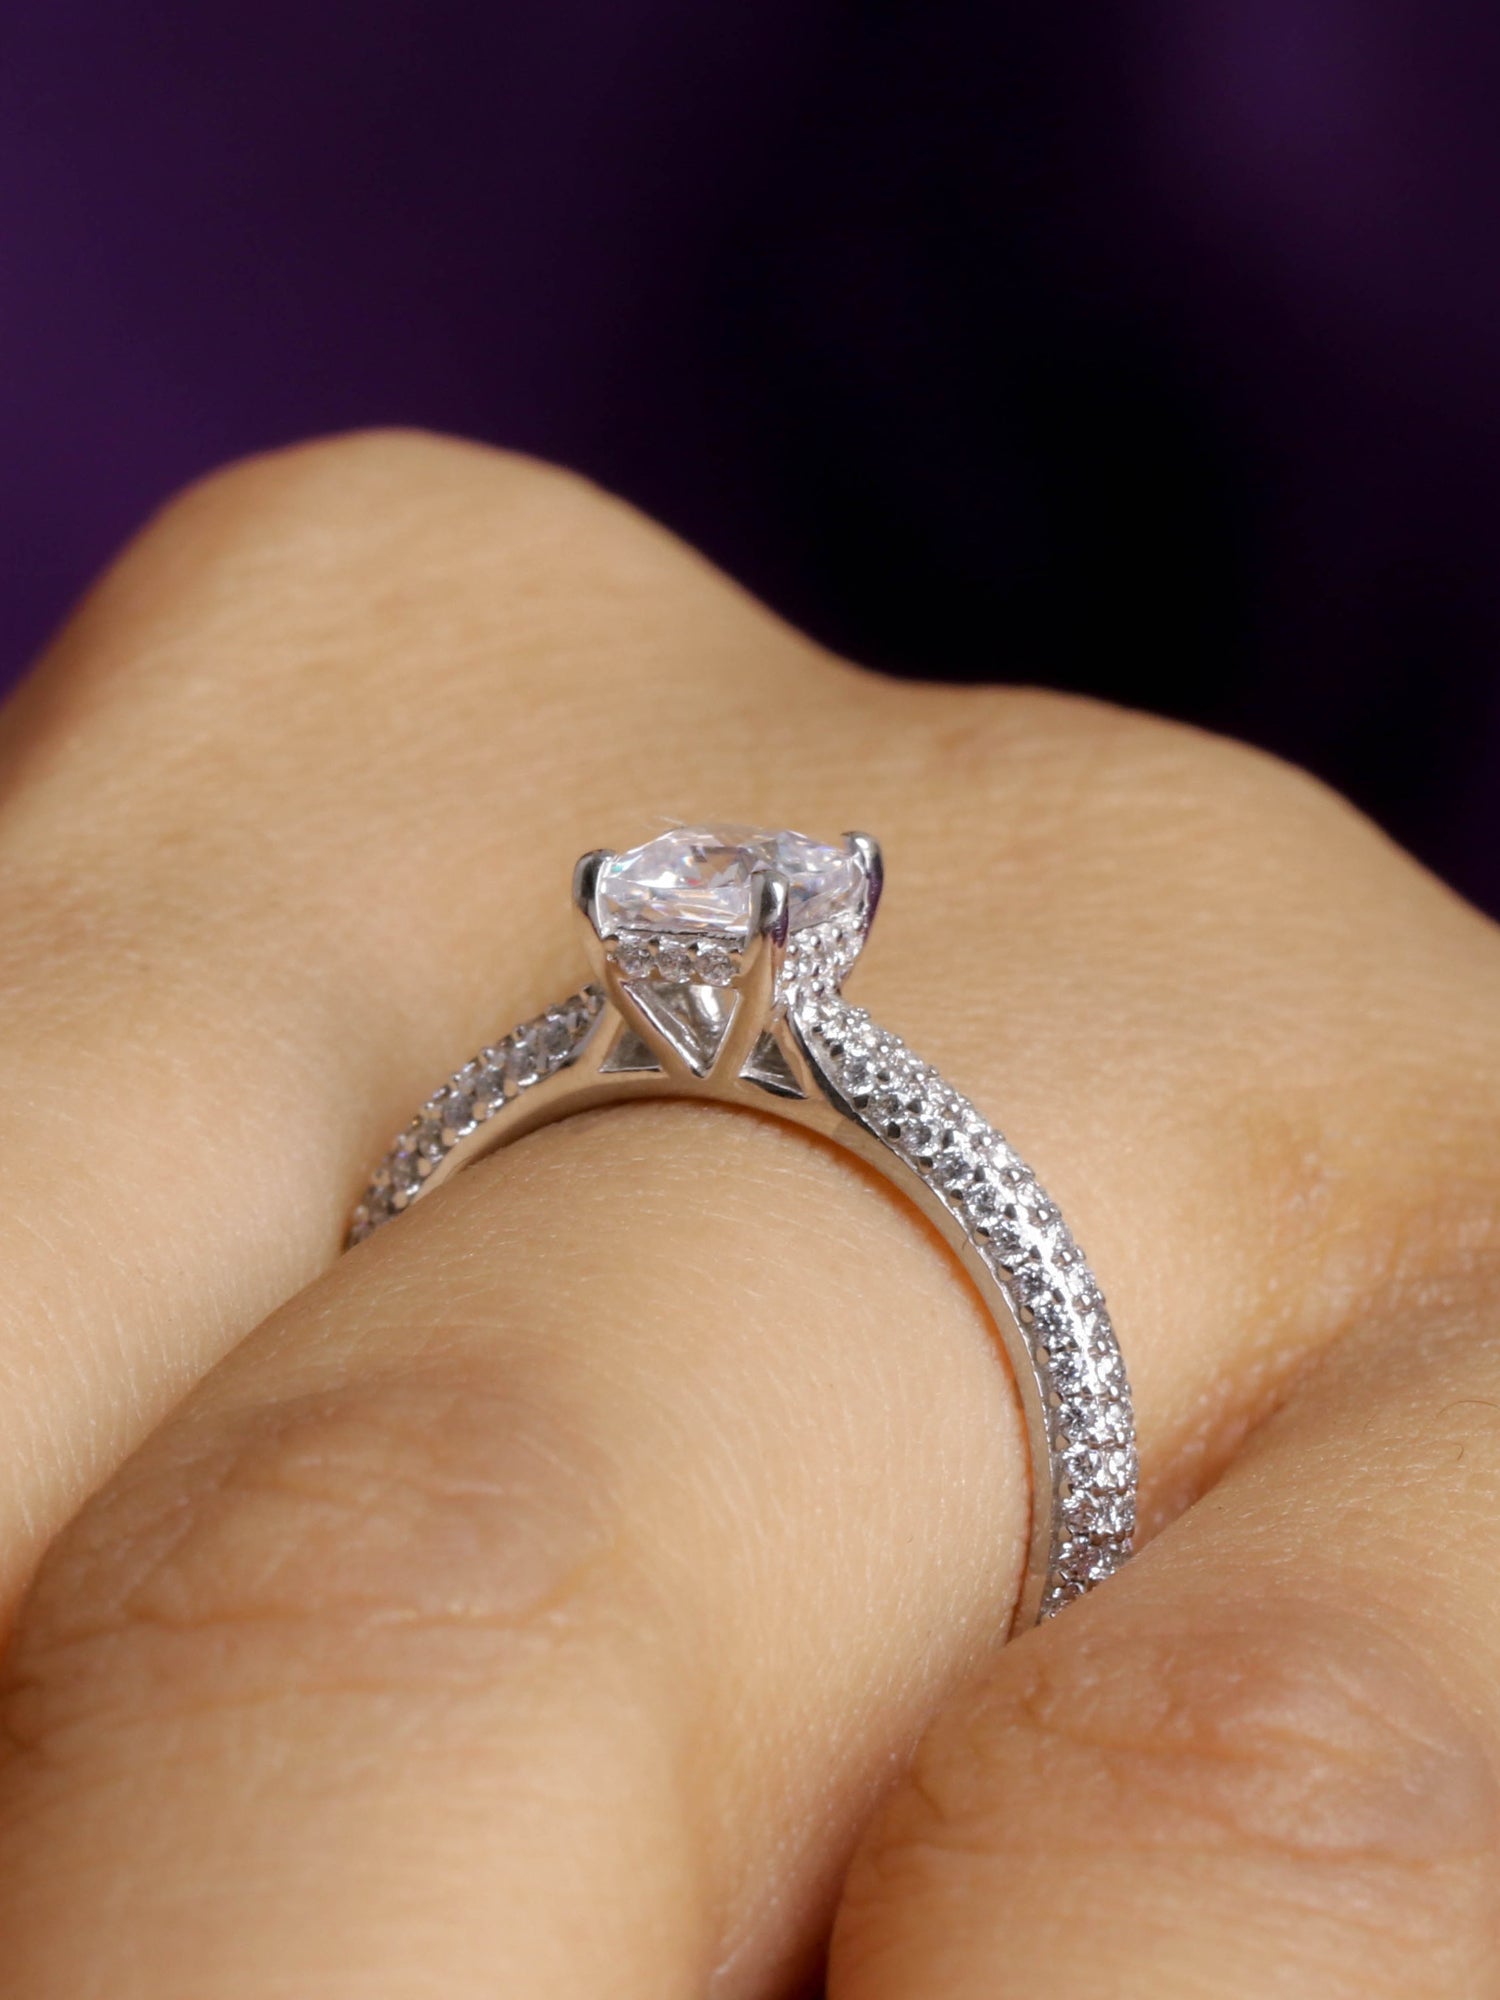 In 2023 How Much Money Should You Spend on a Wedding Ring?